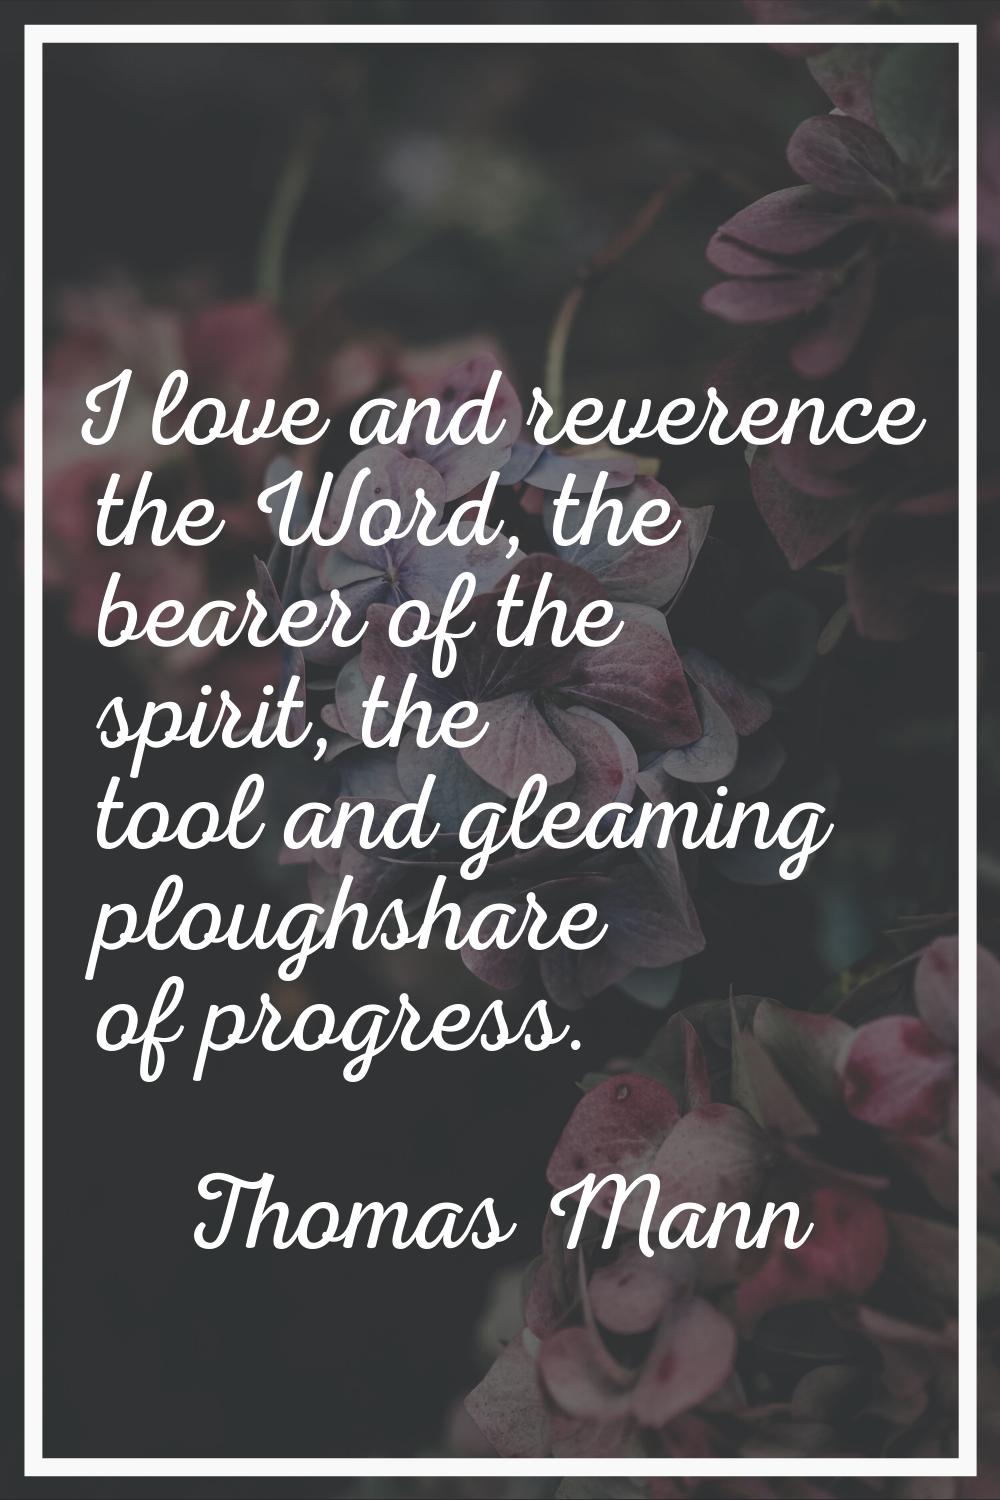 I love and reverence the Word, the bearer of the spirit, the tool and gleaming ploughshare of progr